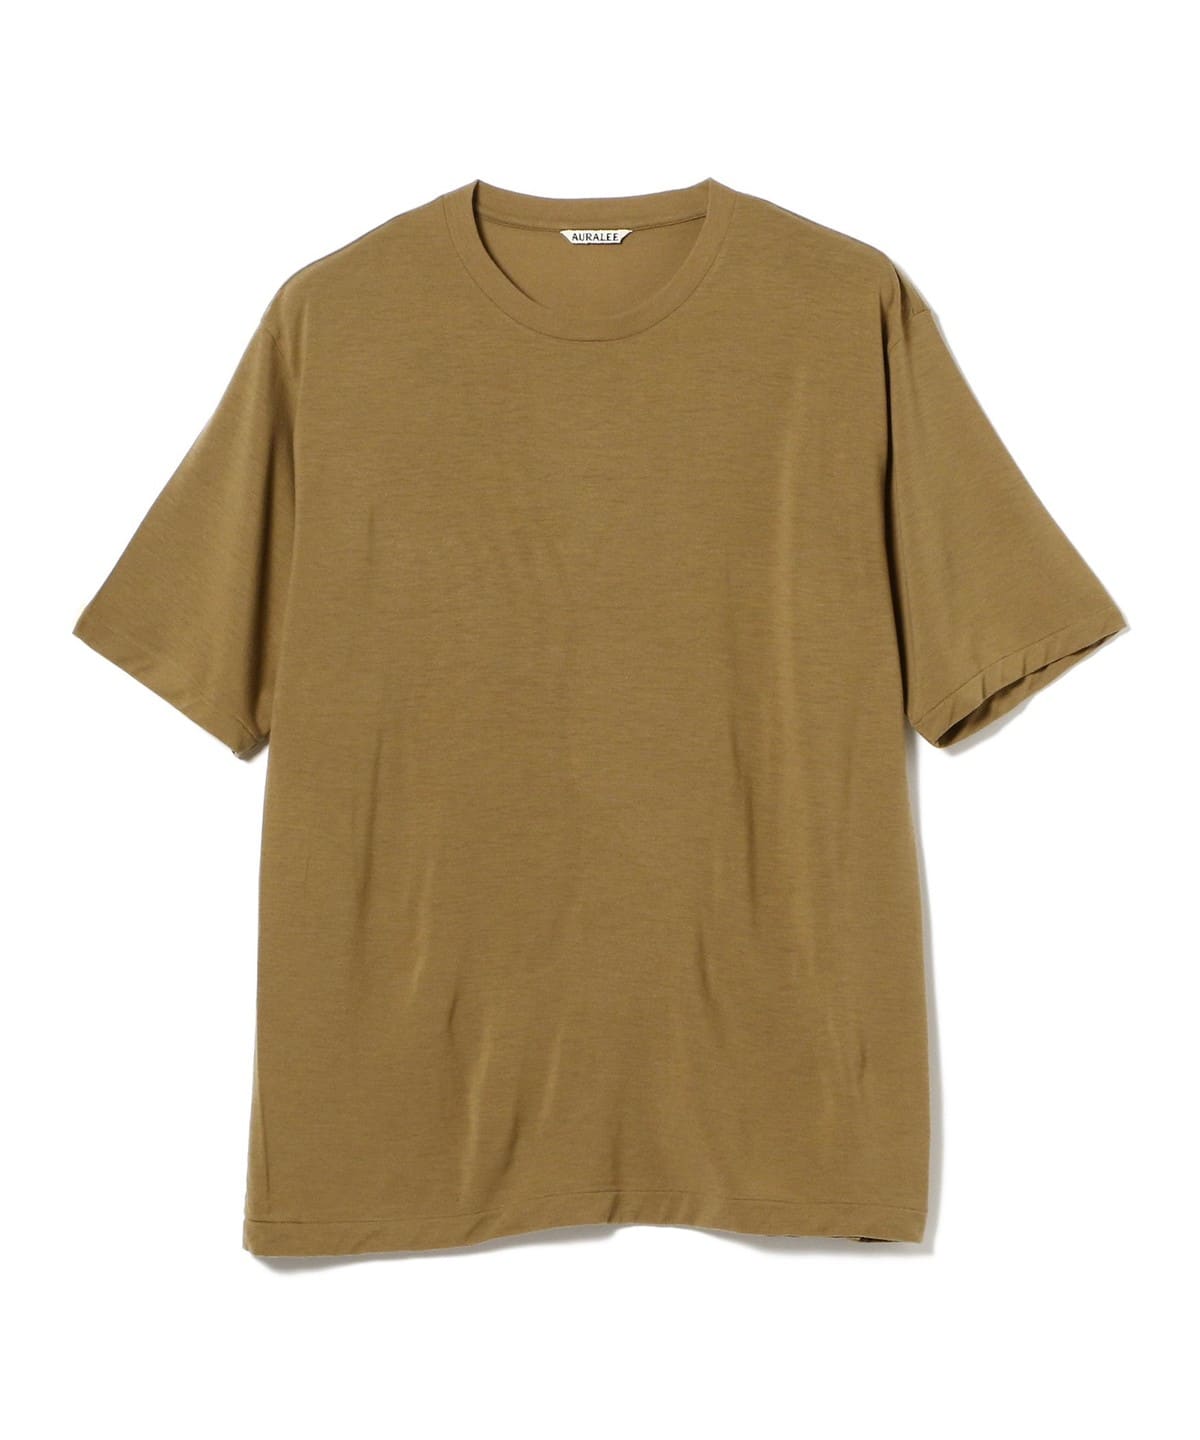 BEAMS T BEAMS T Outlet] AURALEE / SUPER SOFT WOOL JERSEY TEE (T 